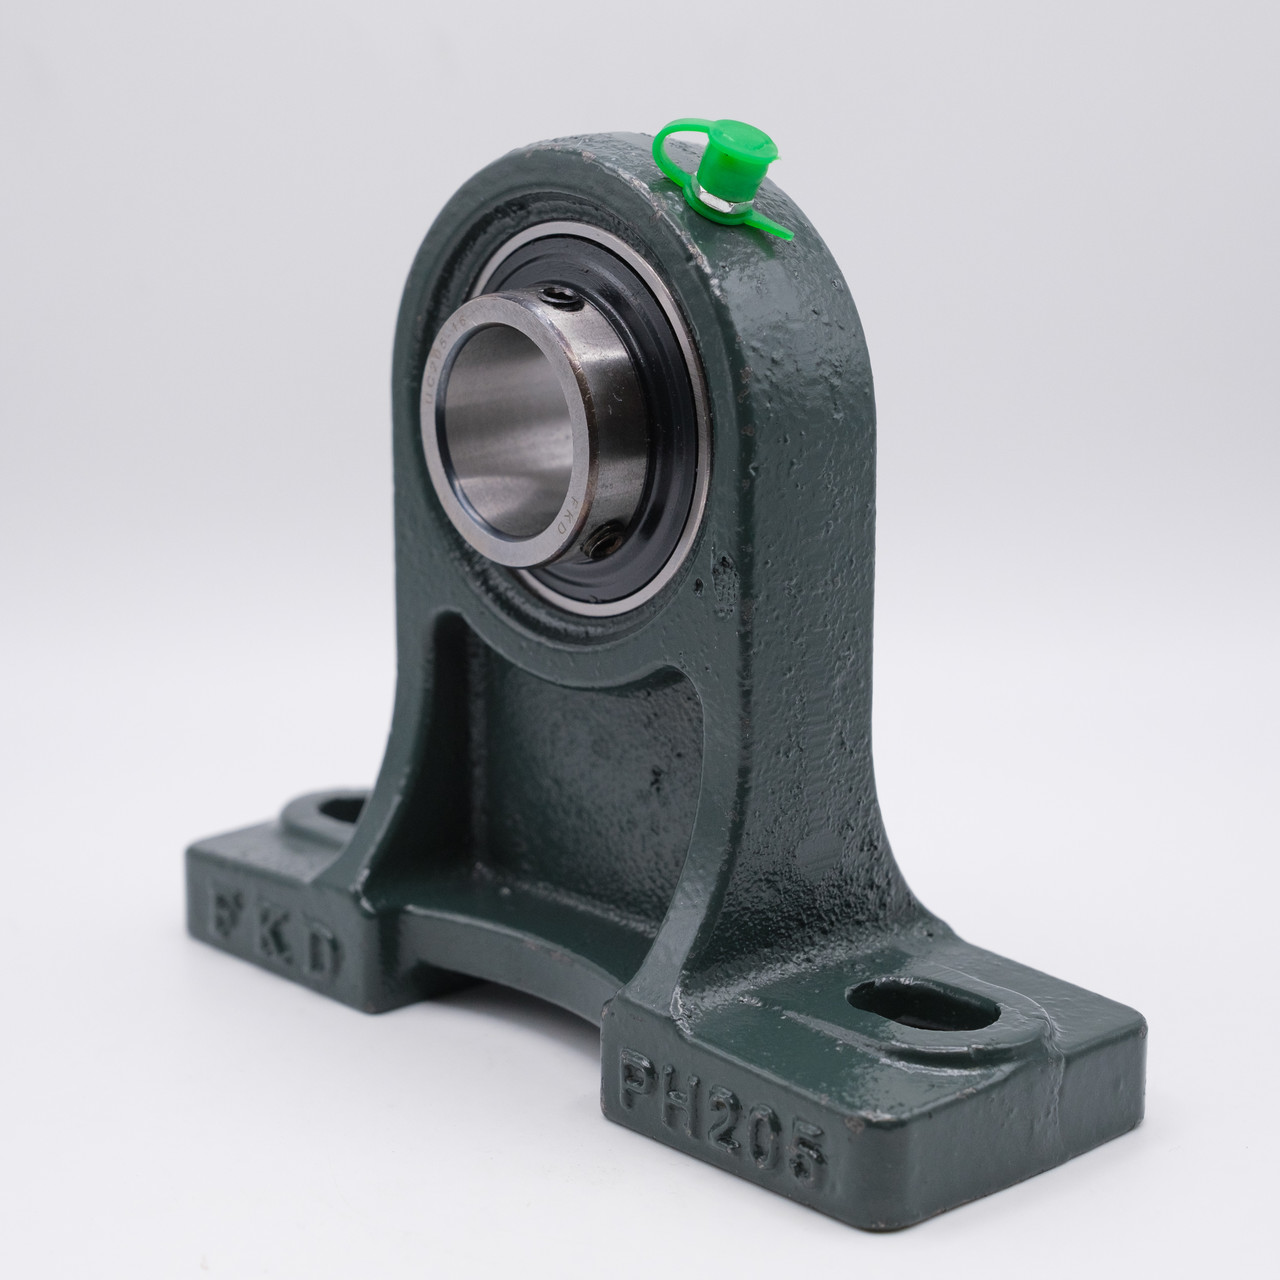 UCPH203 GENERIC 17mm Normal duty 2 Bolt Cast Iron Pillow Block Housed Unit Bearing with extended base to centre height - Metric Thumbnail